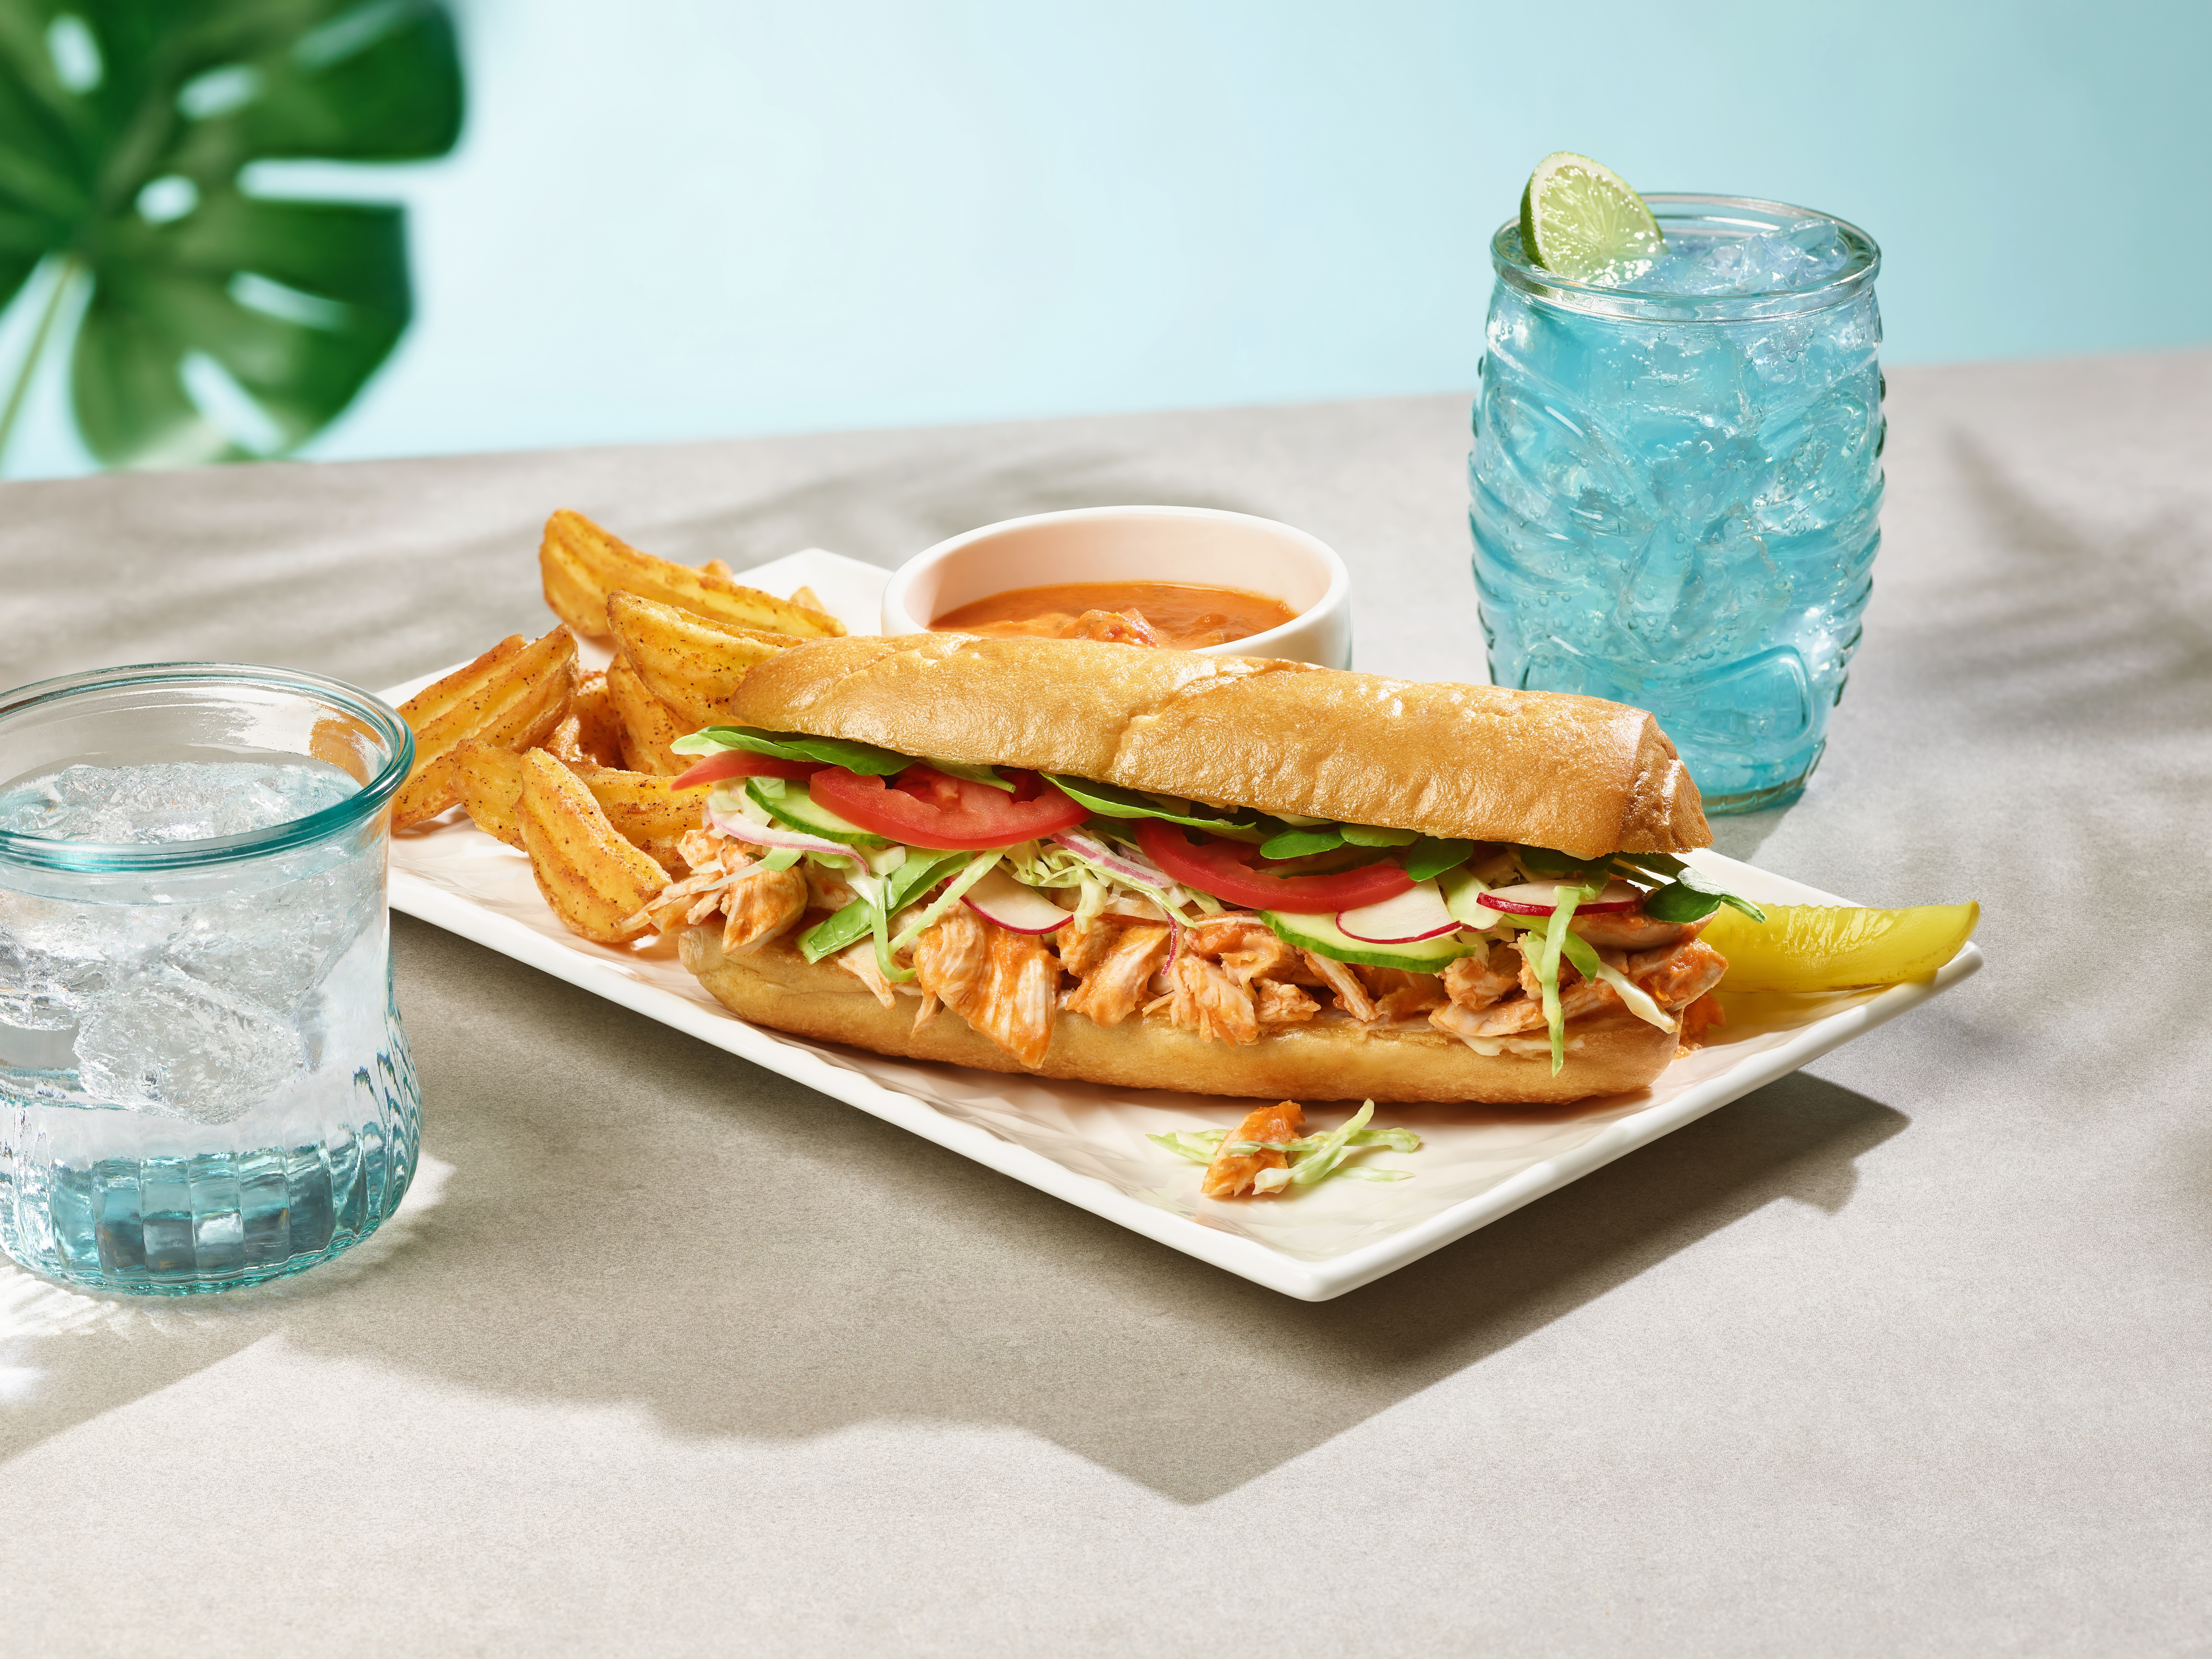 Roasted chicken dip sandwich with potato wedges and tiki drink.